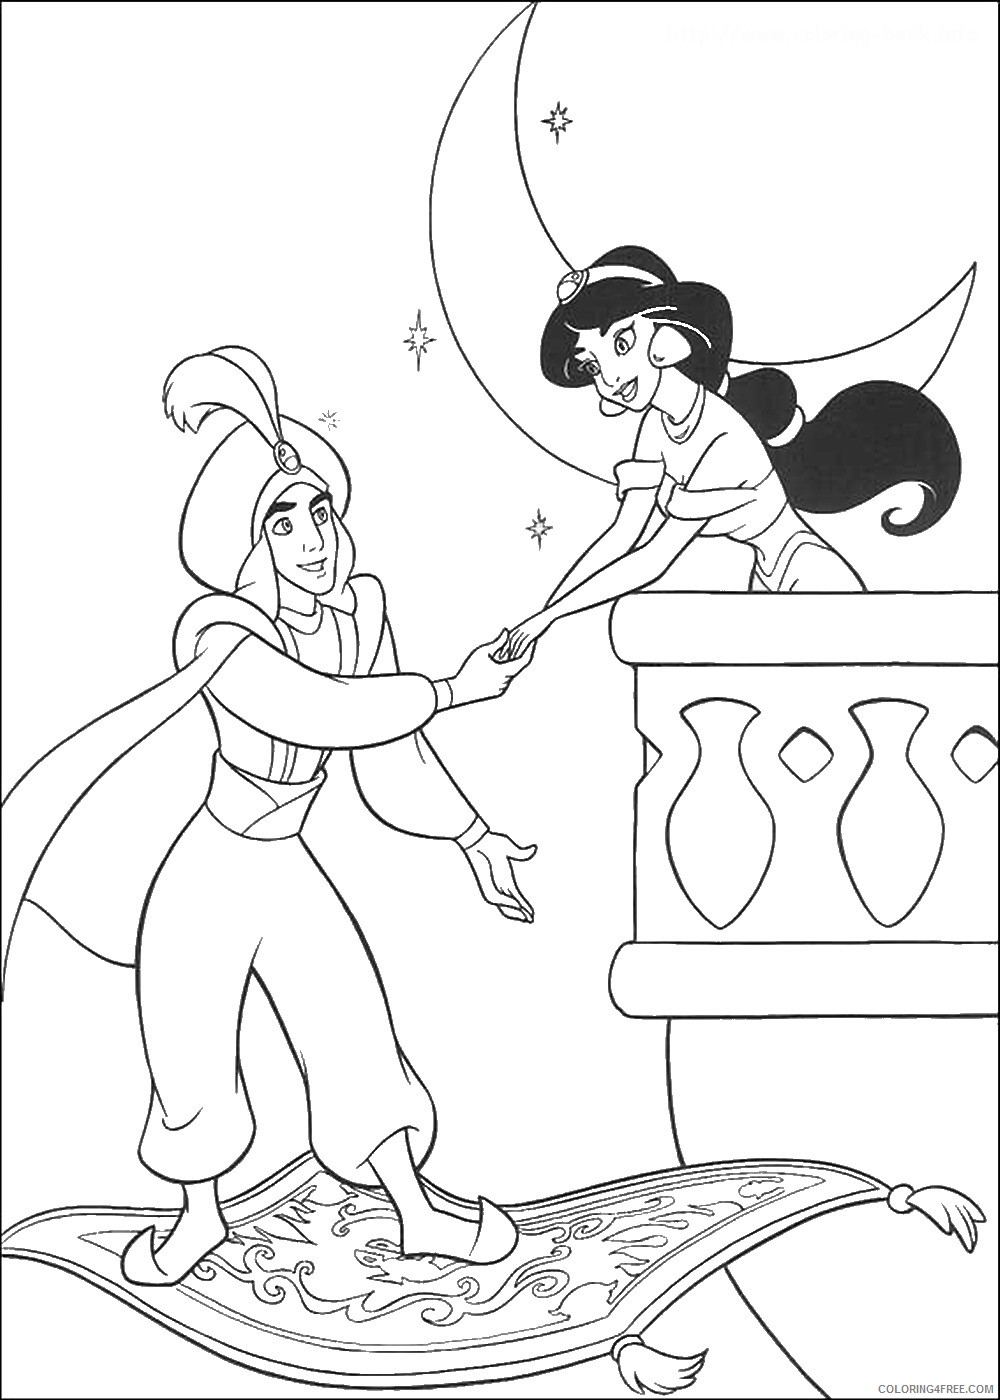 Aladdin Coloring Pages Cartoons aladdin_22 Printable 2020 0300 Coloring4free